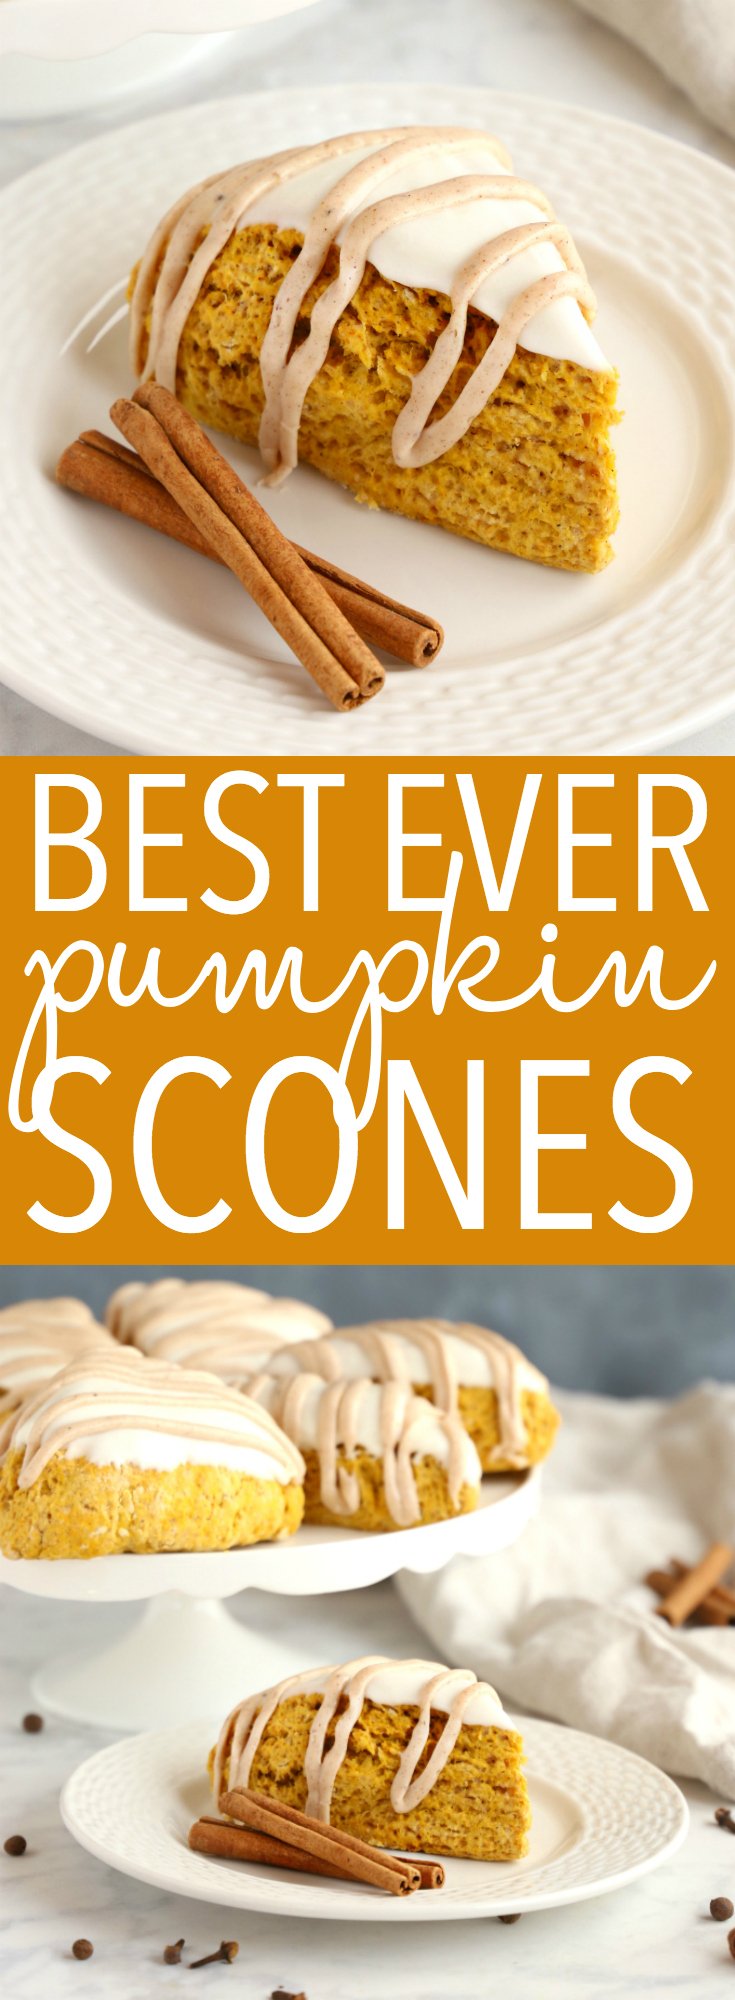 These Best Ever Pumpkin Scones are everyone's favourite fall treat for pumpkin season! And they taste even better than Starbucks' Pumpkin Scones - moist and delicious! Recipe from thebusybaker.ca! #scones #pumpkin #pumpkinscones #fall #autumn #baking #recipe #starbucks #copycat #snack #dessert #treat #cake #homemade #coffee via @busybakerblog